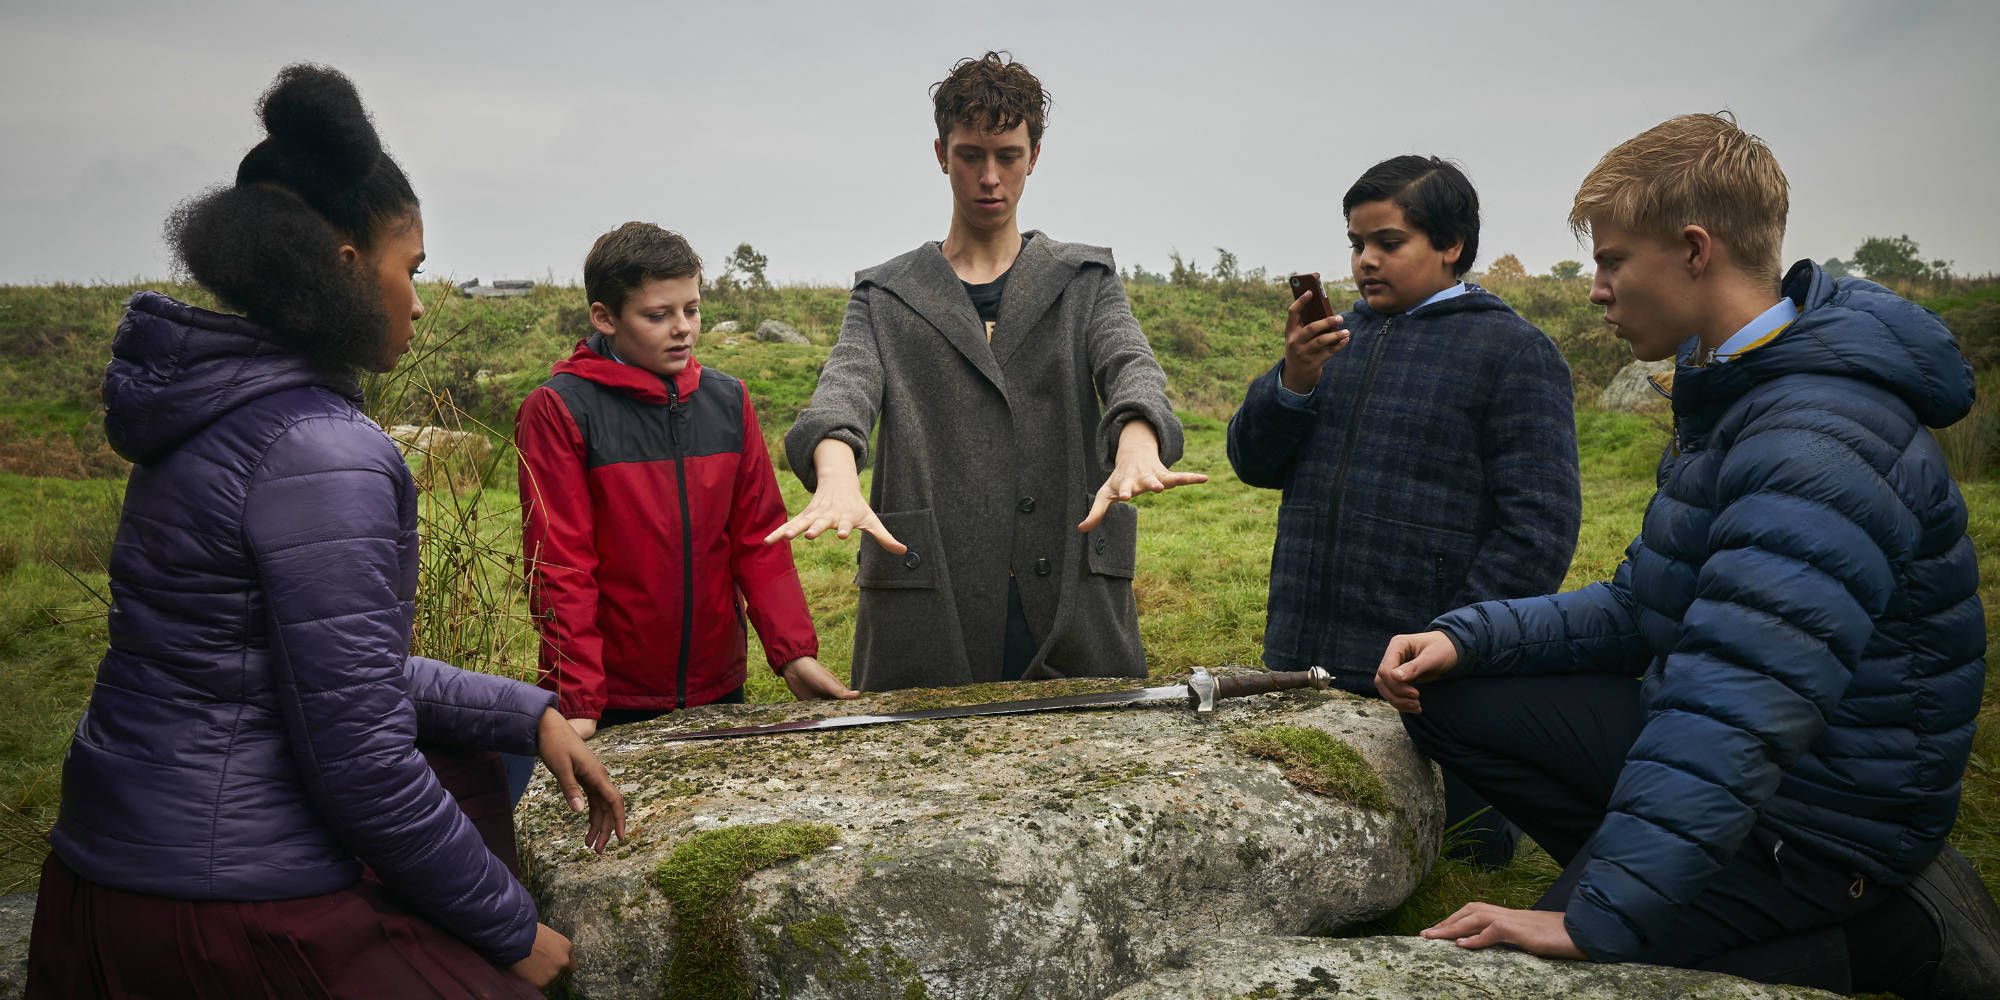 Rhianna Dorris, Louis Ashbourne Serkis, Angus Imrie, Dean Chaumoo and Tom in The Kid Who Would Be King